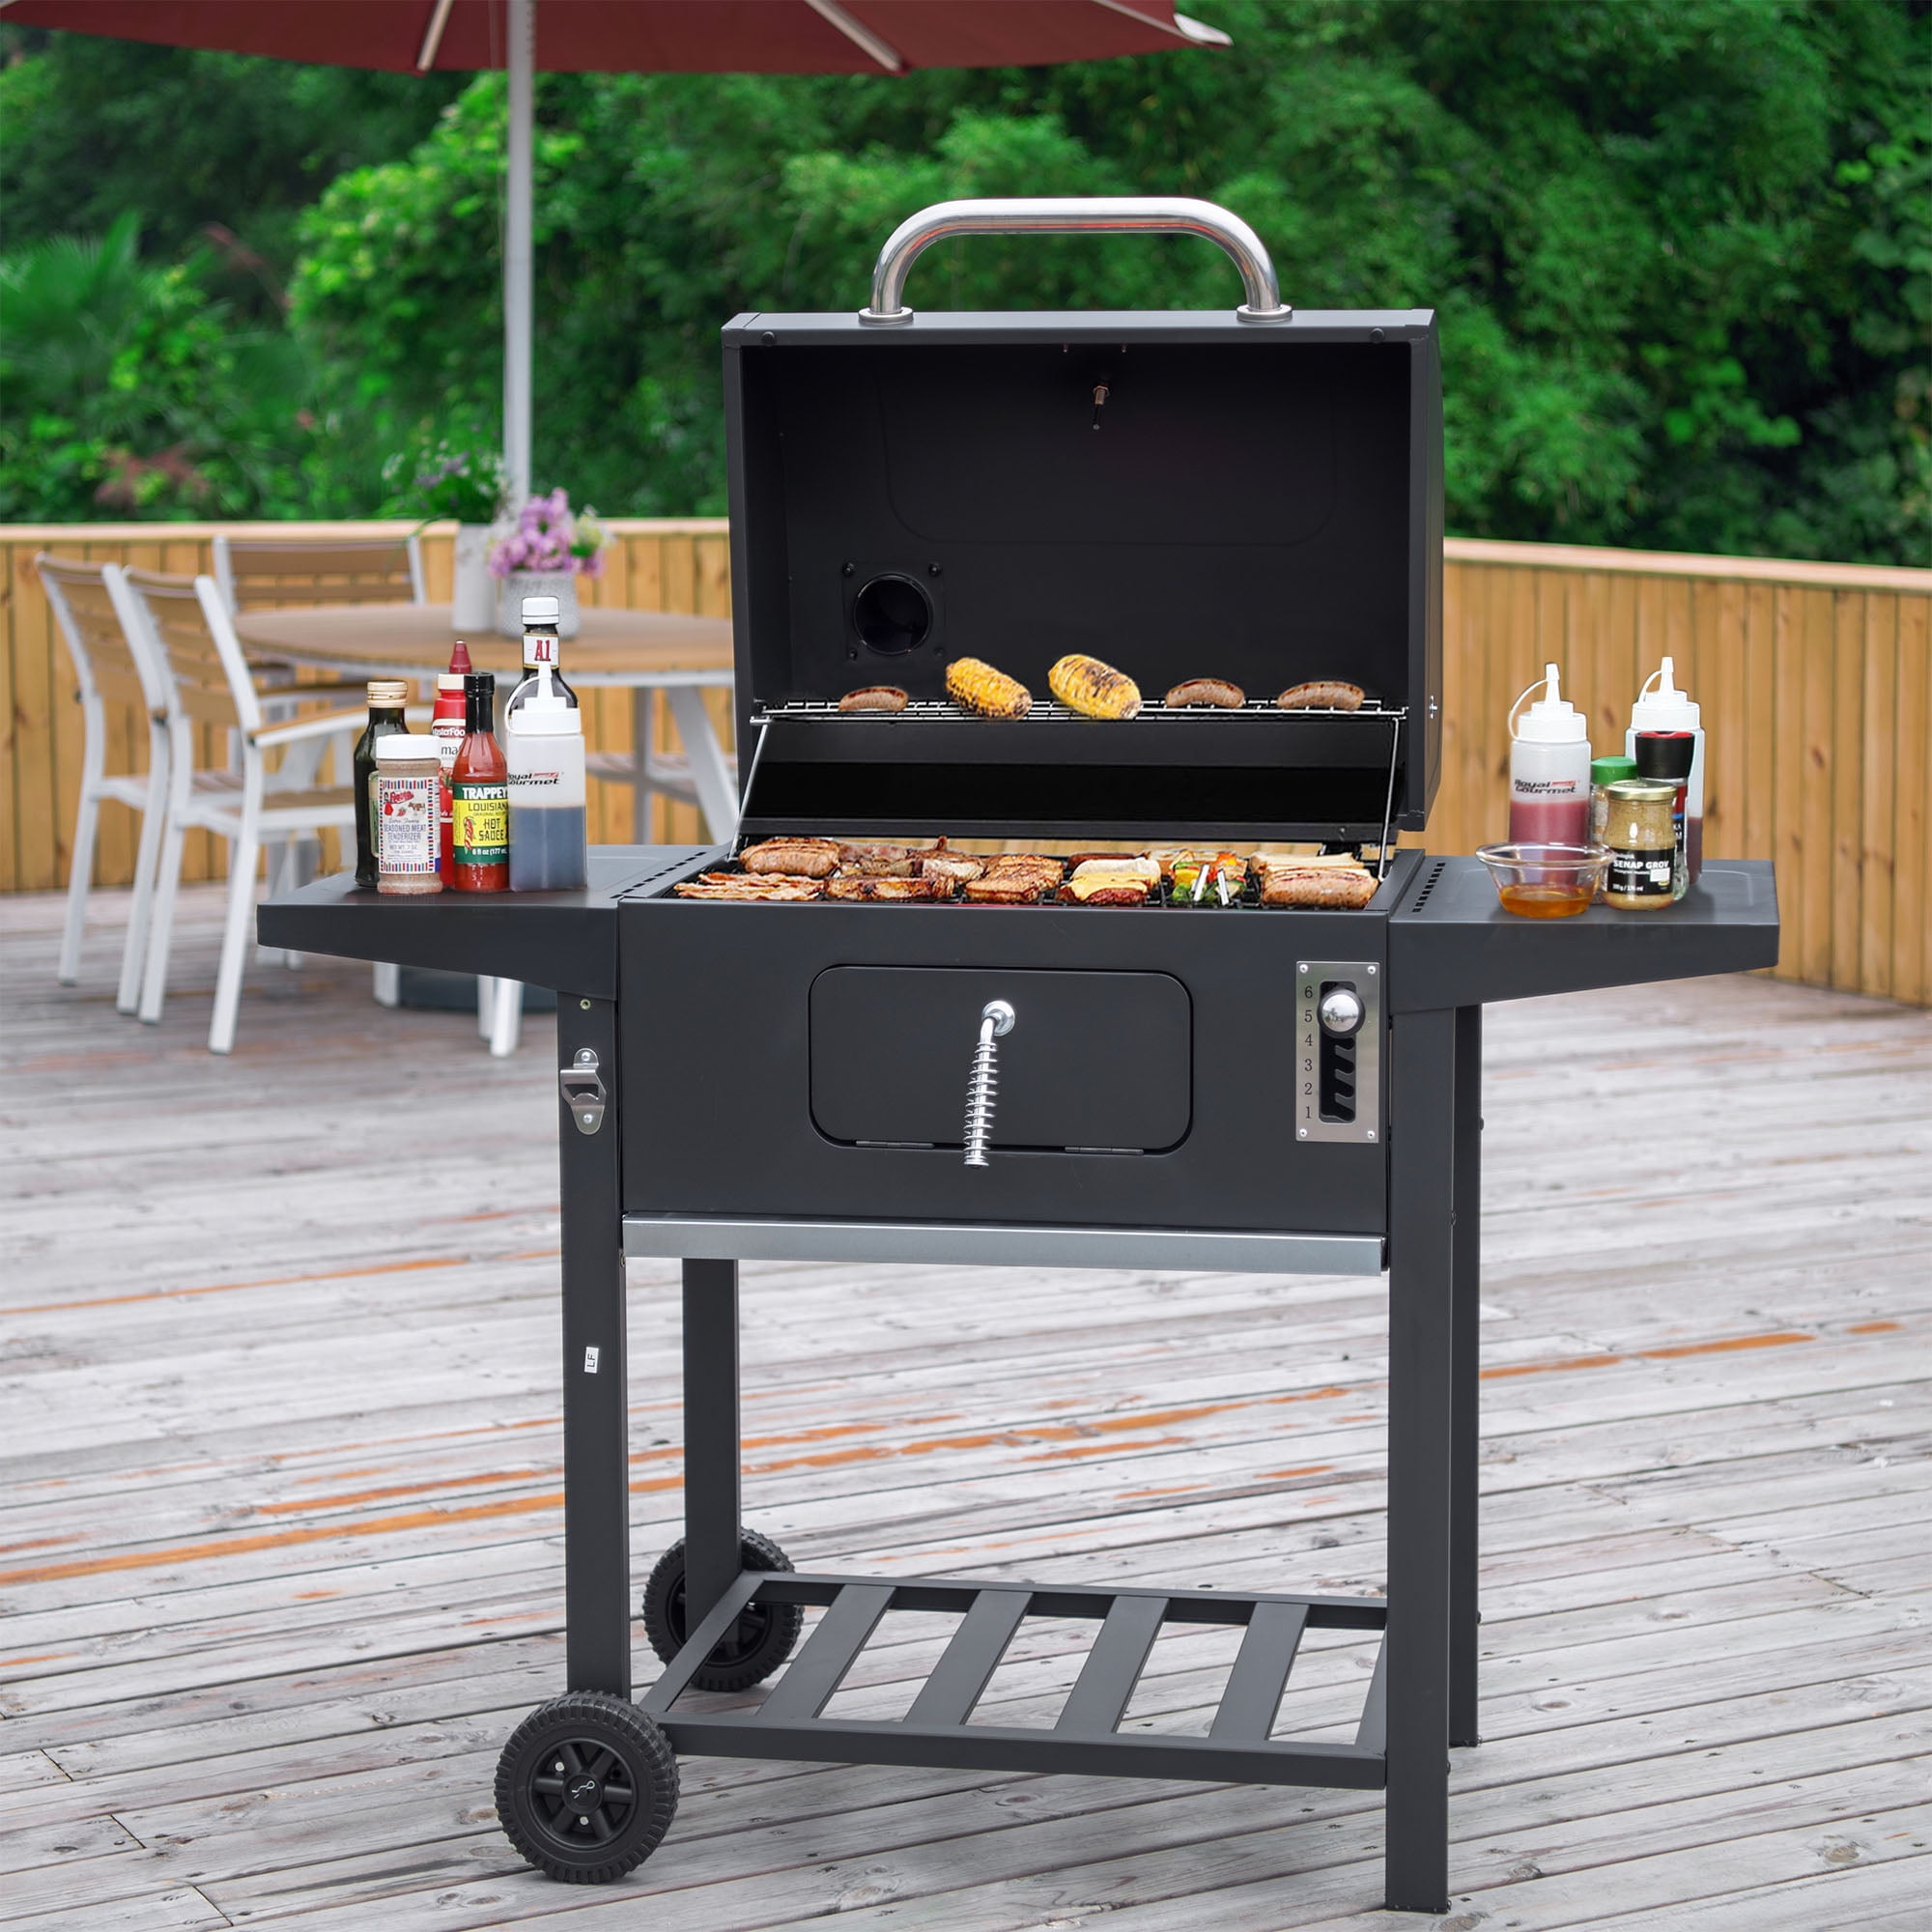 Details about   Royal Gourmet 23-inch Charcoal BBQ Grill Charcoal Outdoor Patio FREE SHIPPING 